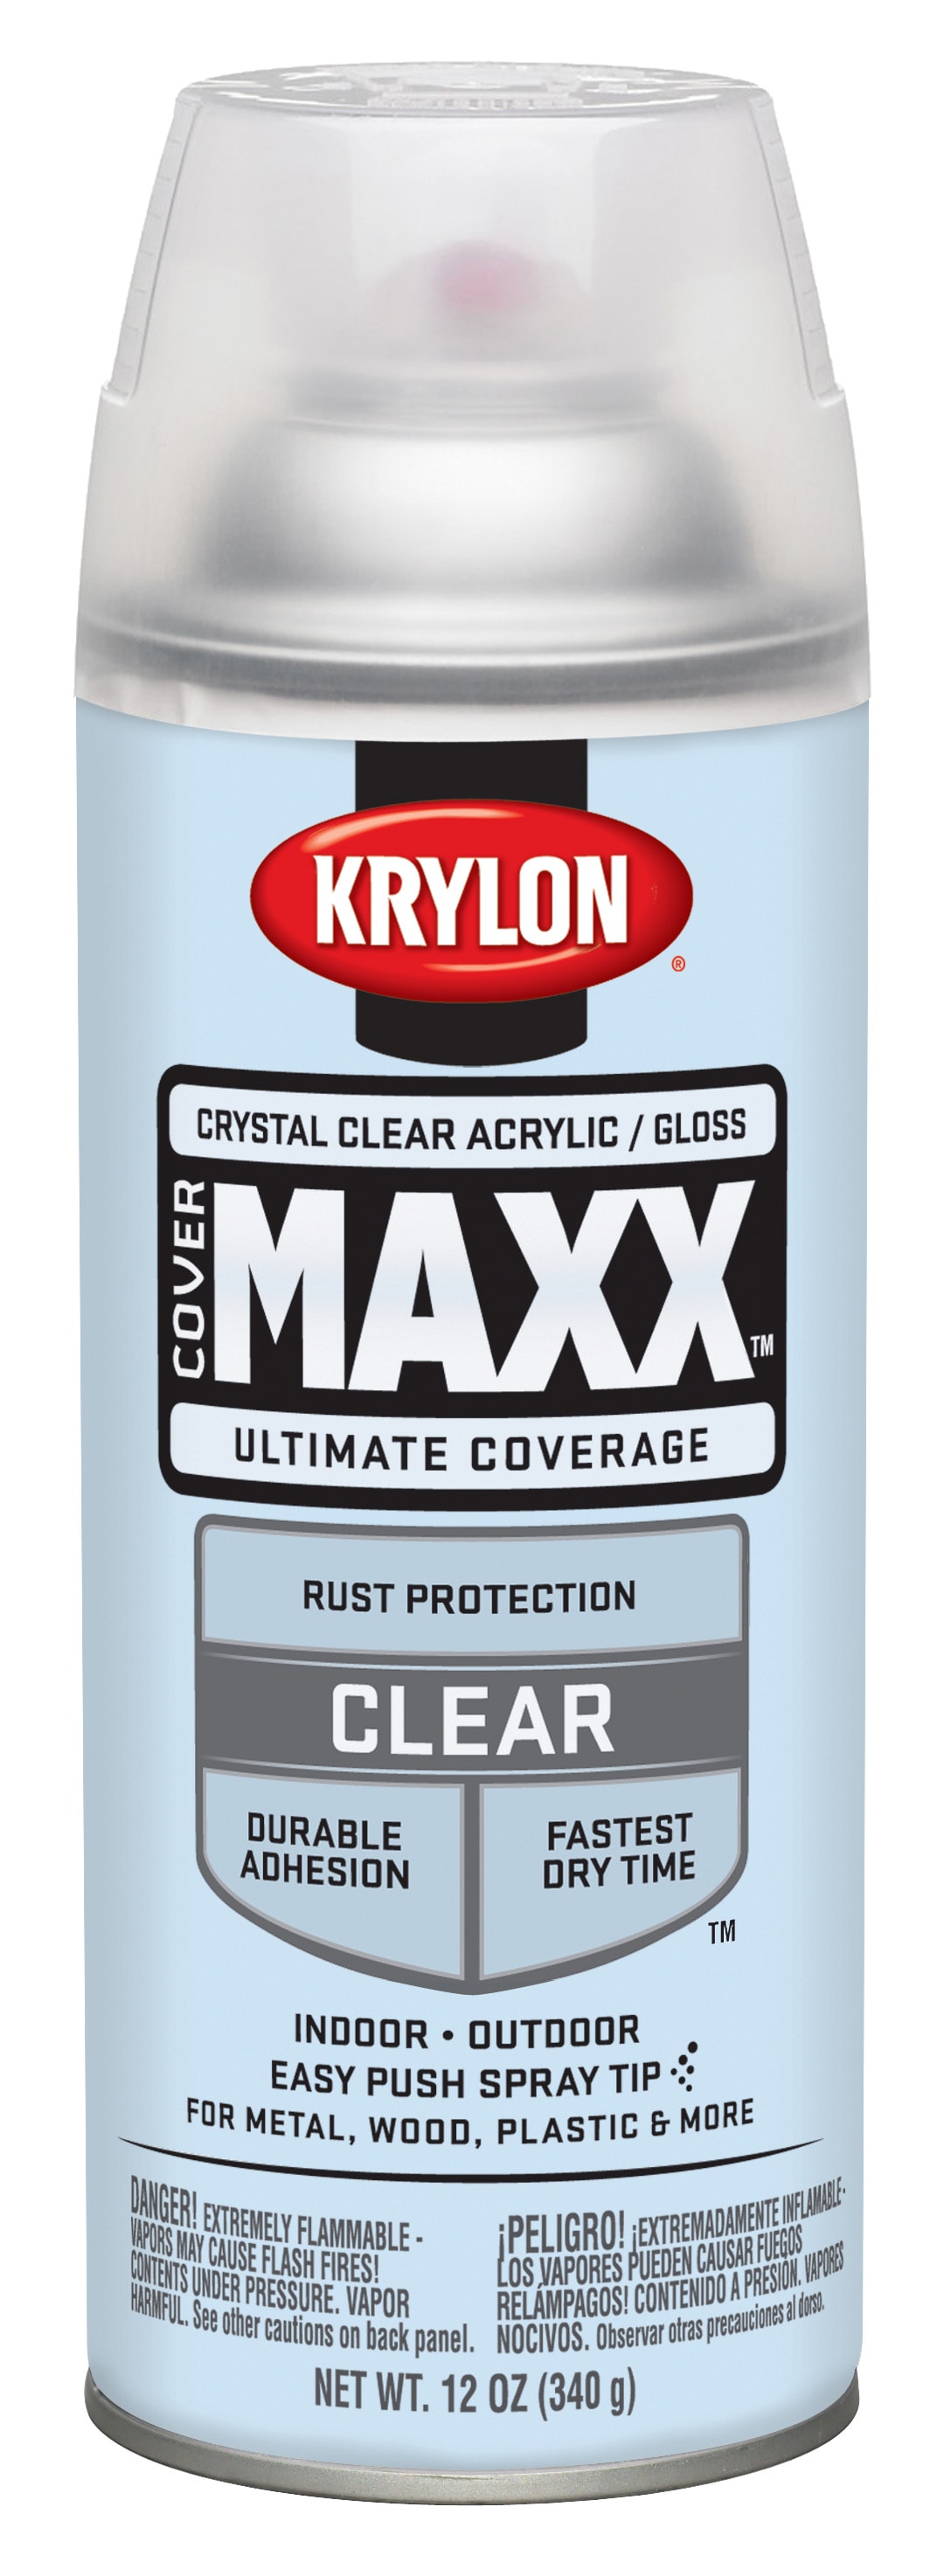 Krylon Gloss Clear Spray Paint and Primer In One (NET WT. 12-oz ) at